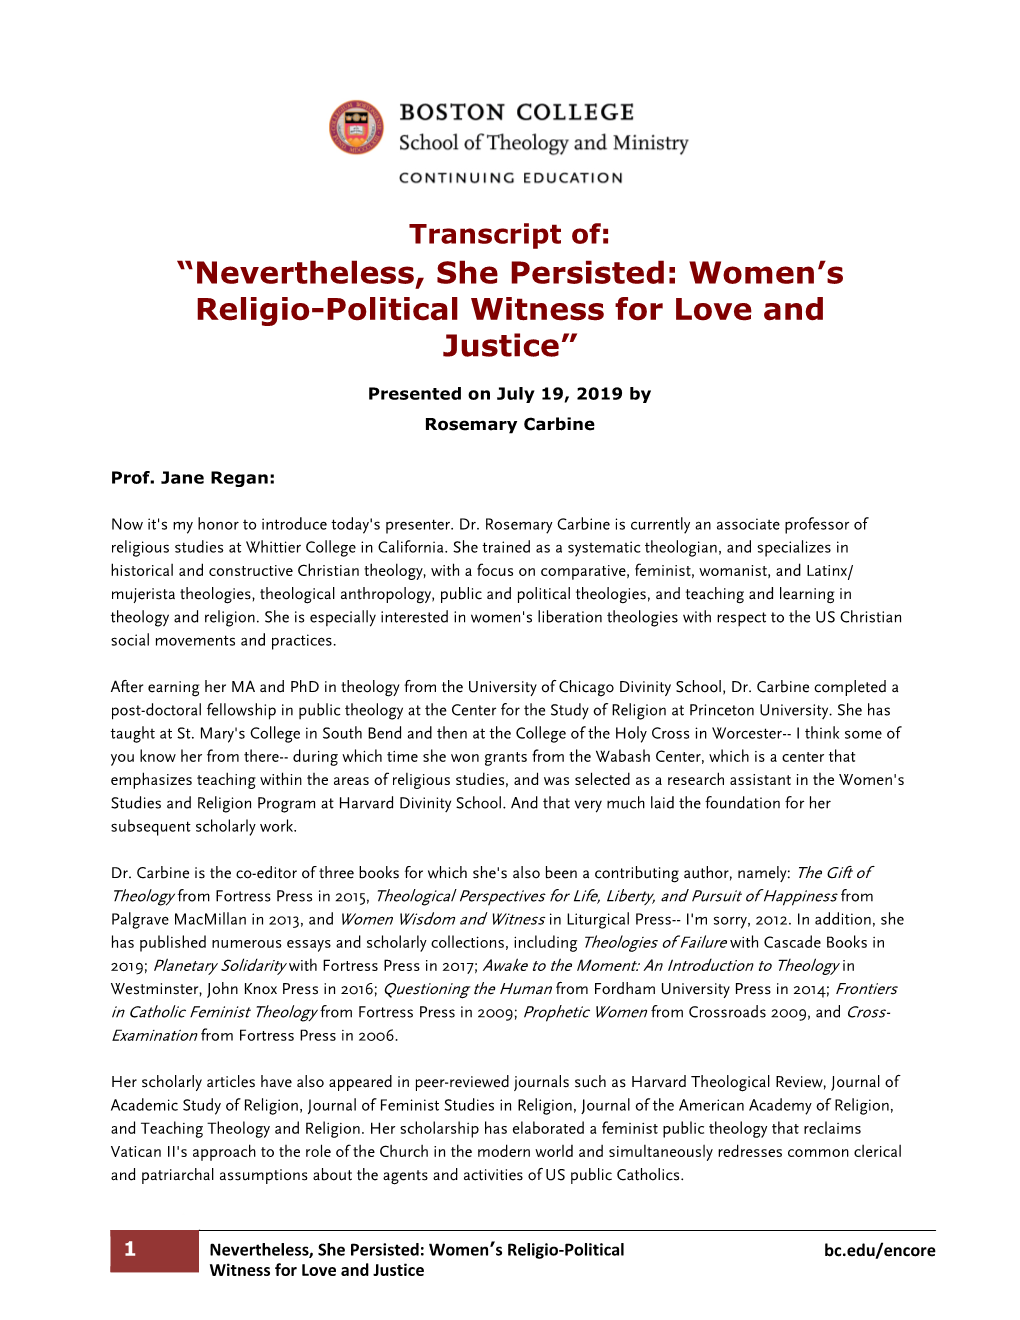 “Nevertheless, She Persisted: Women's Religio-Political Witness For